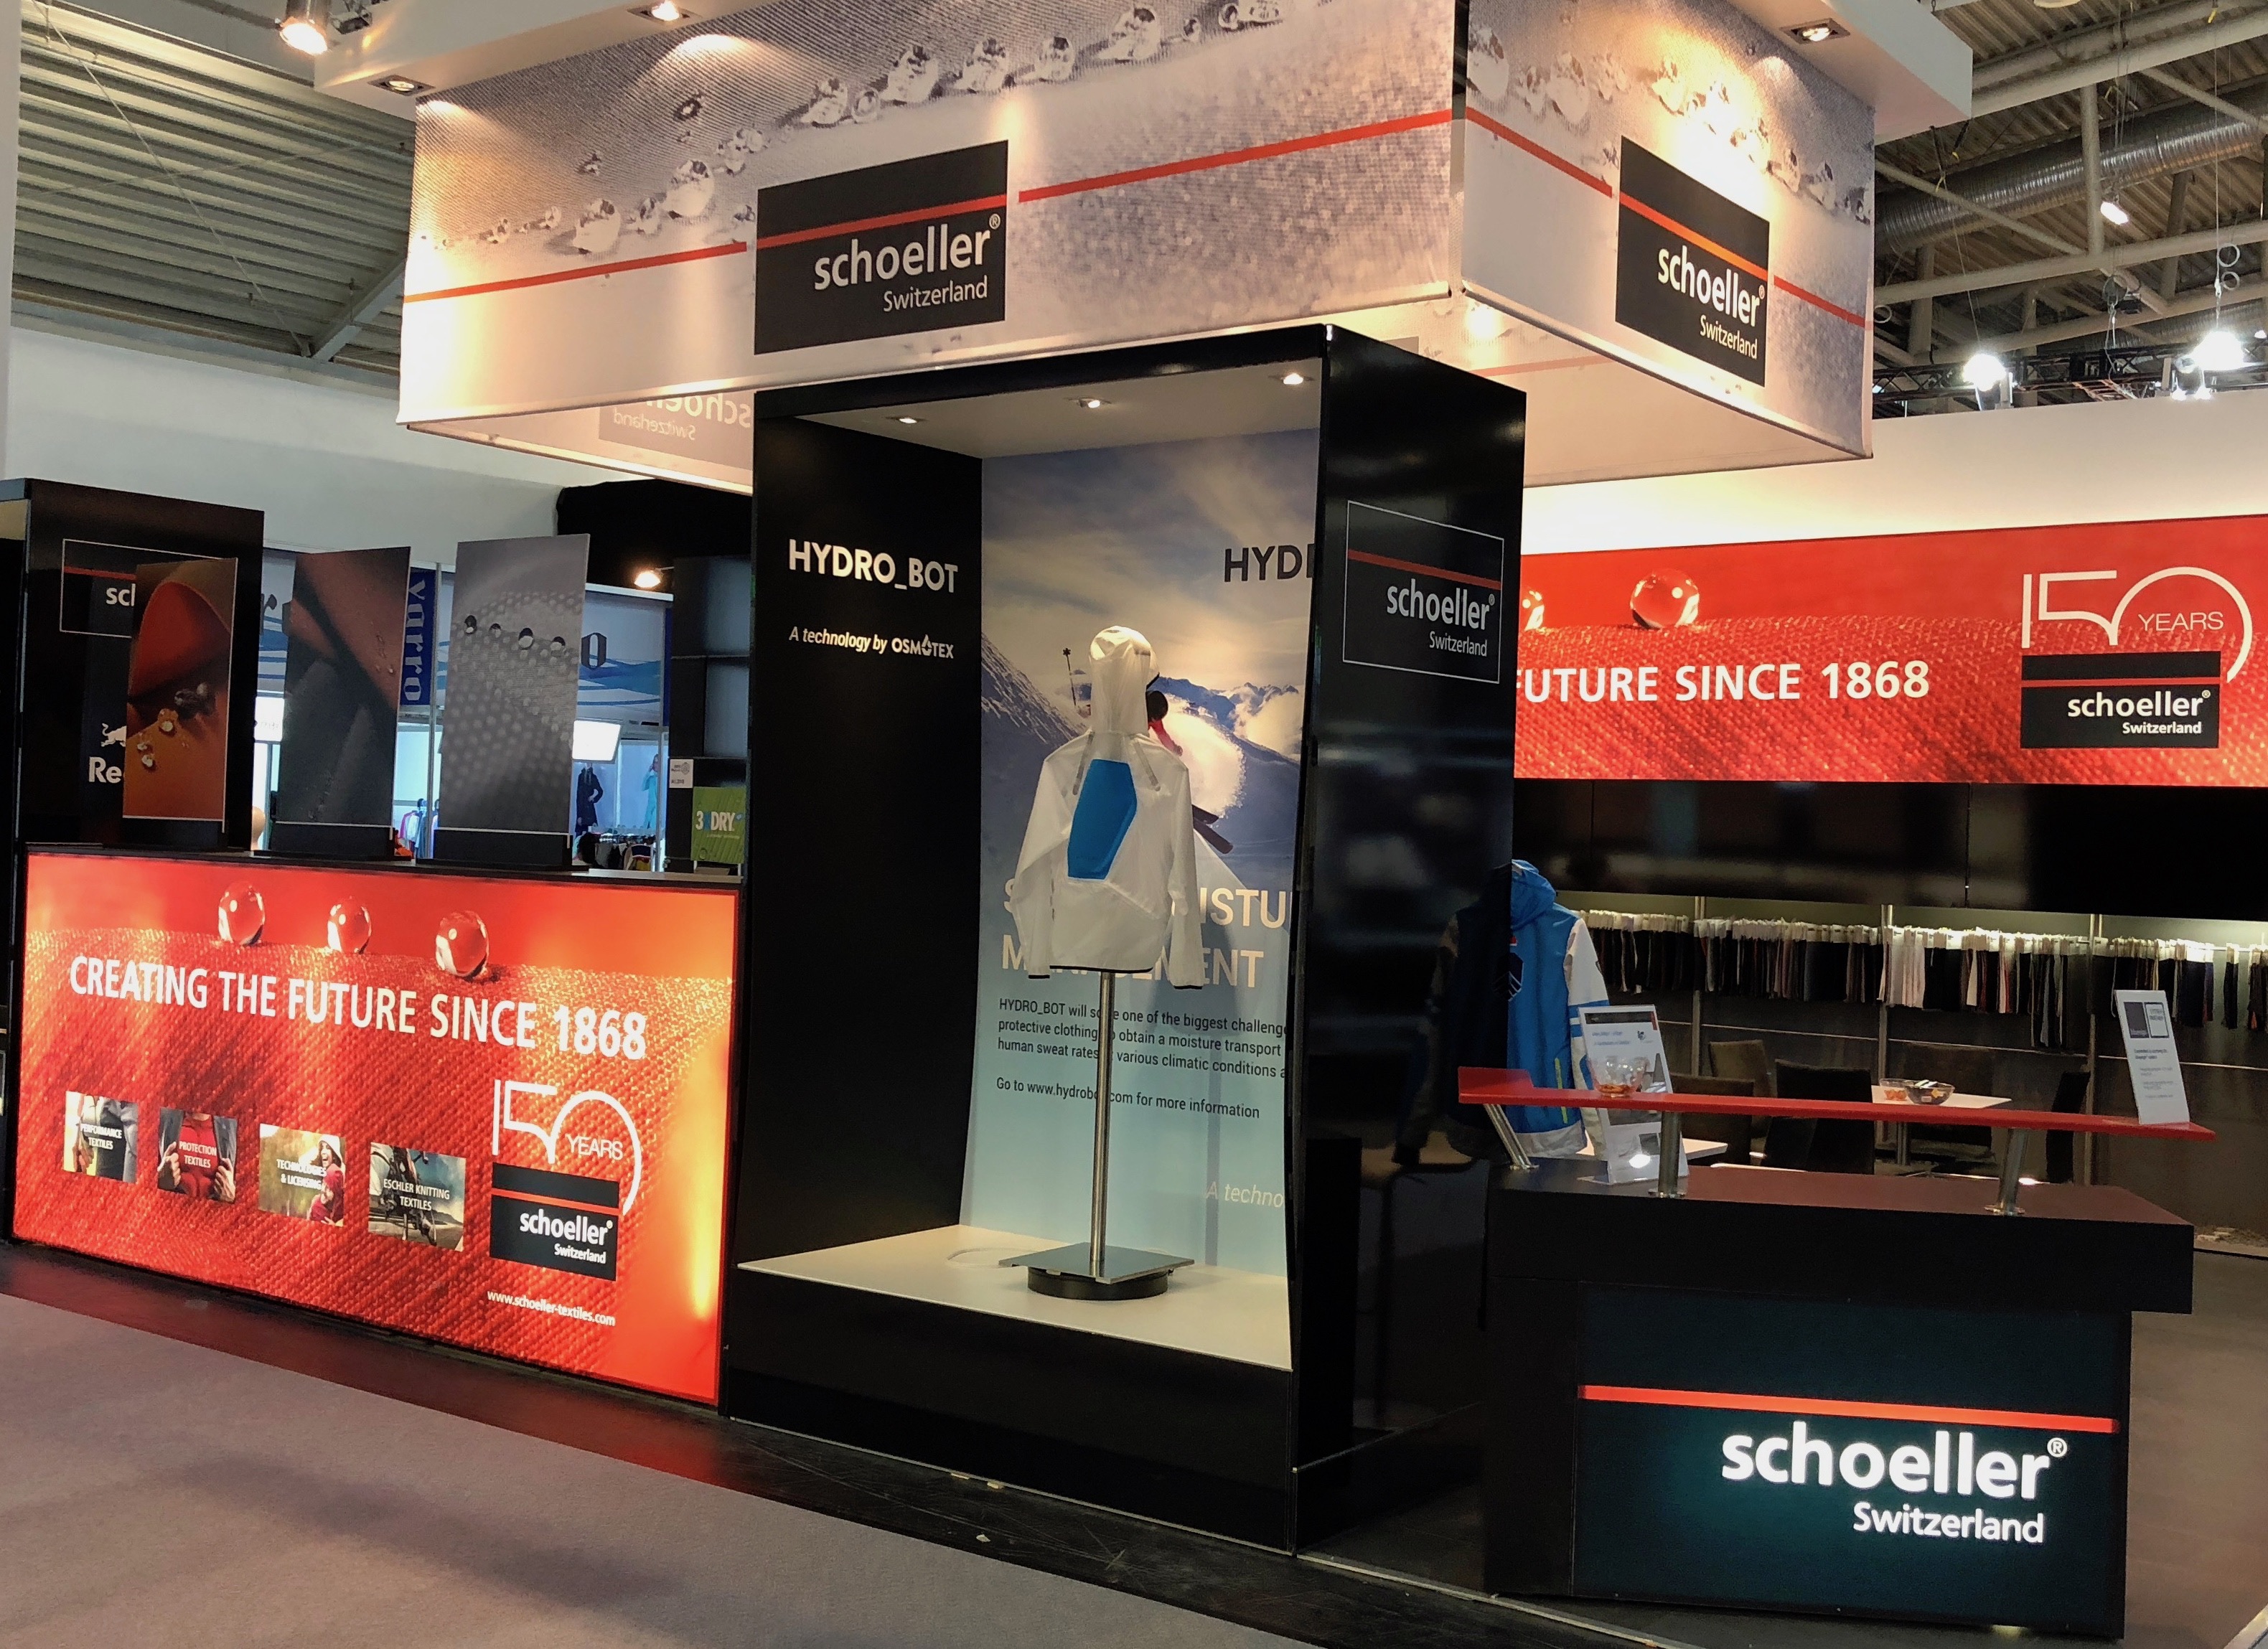 Schoeller is partnering with Osmotex and is showing the HYDRO_BOT jacket on their stand.